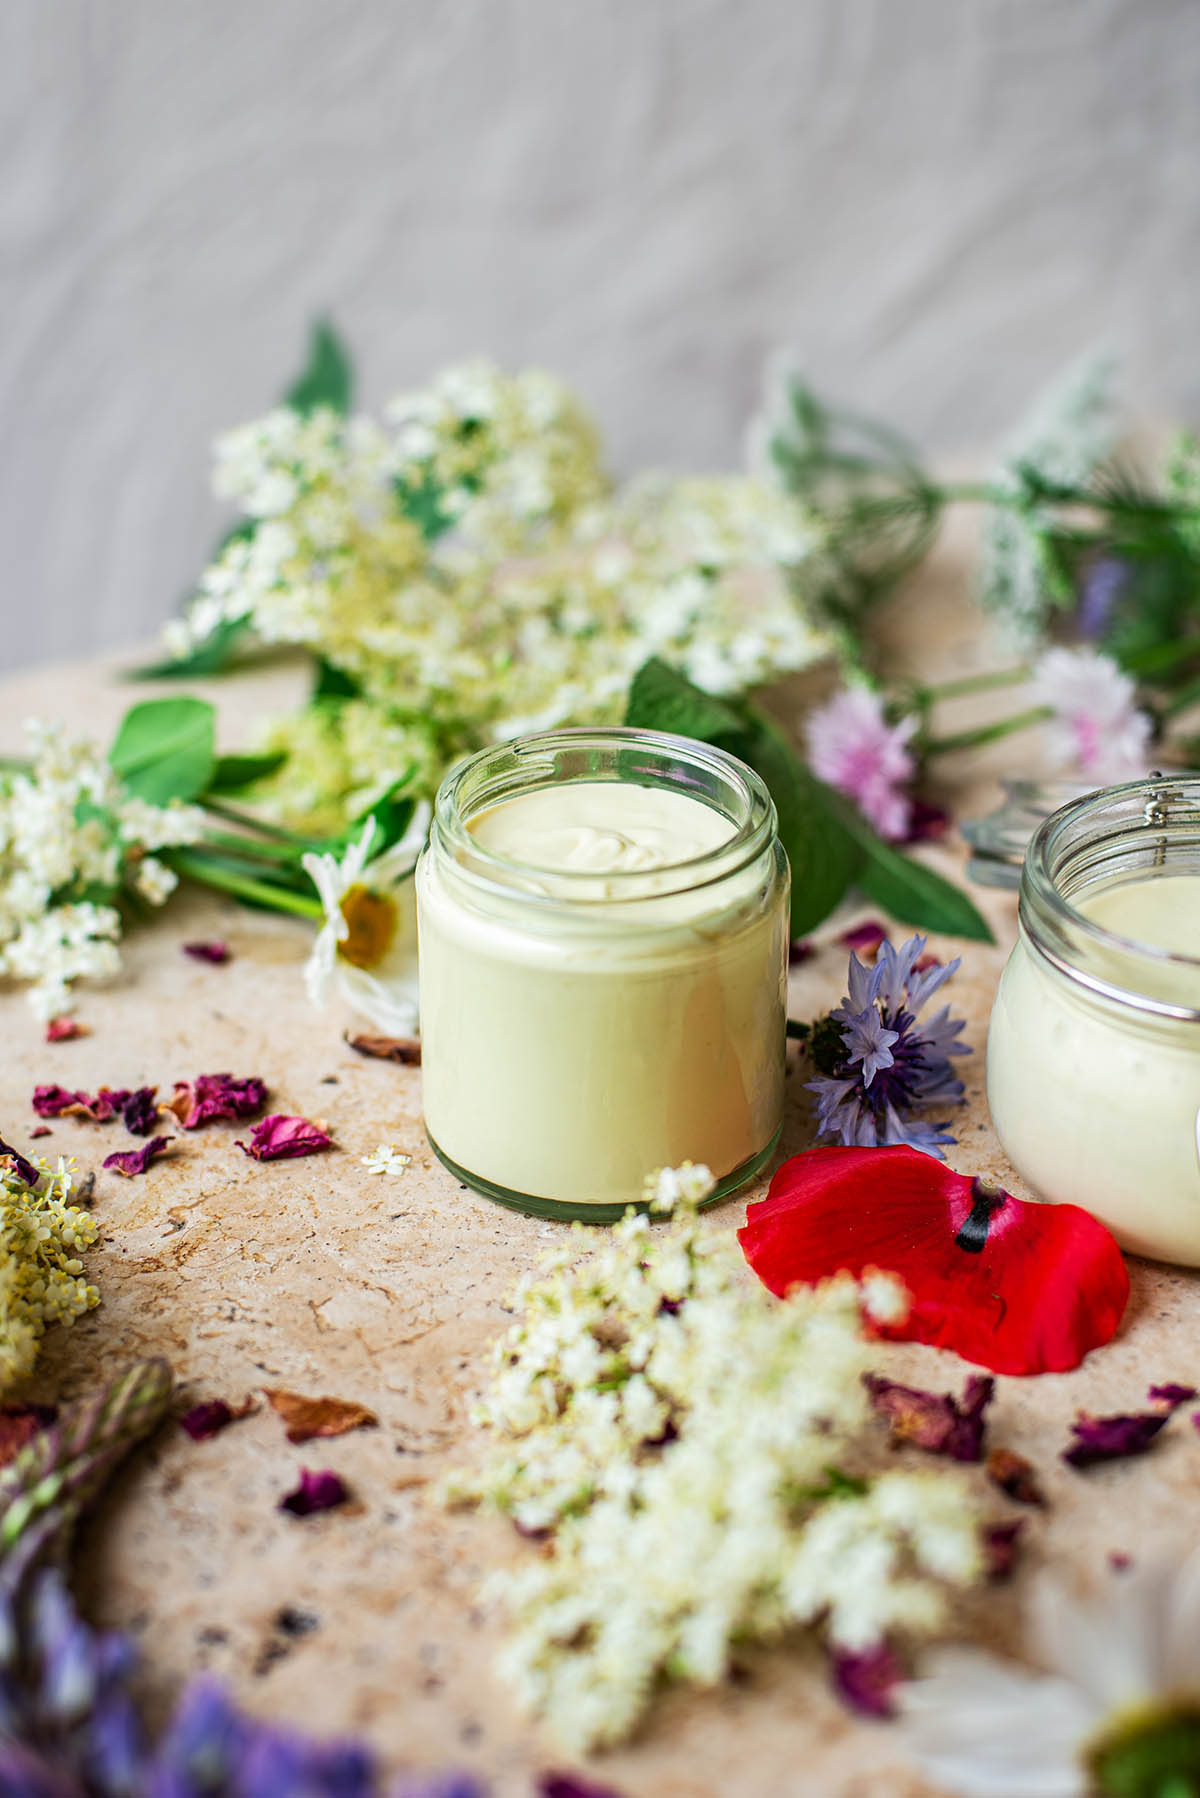 Front view of a glass jar of cream with wildflowers around.